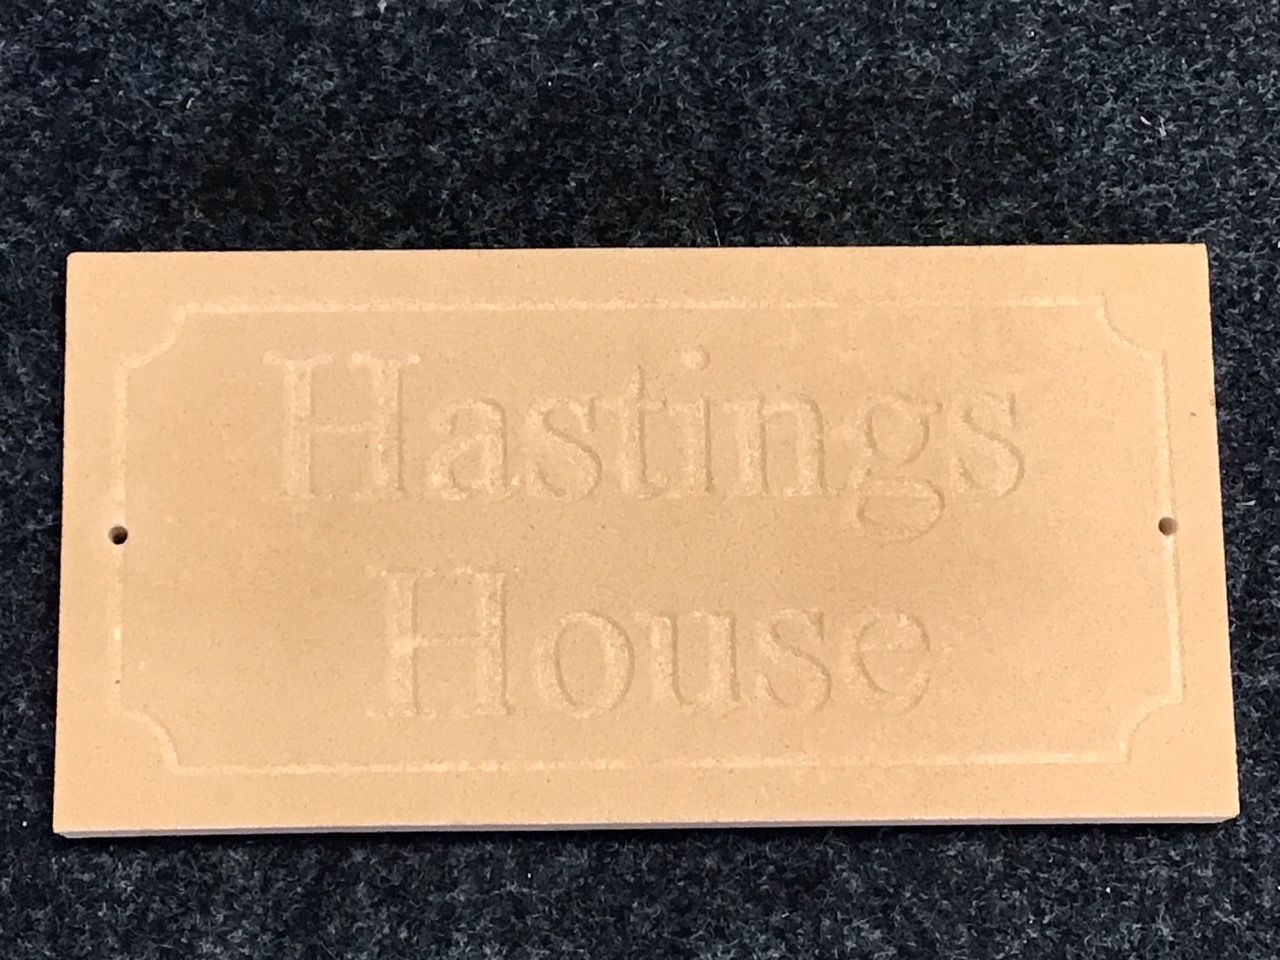 A sandstone slab carved with house name in panel - Hastings House. (15.75in x 8in)